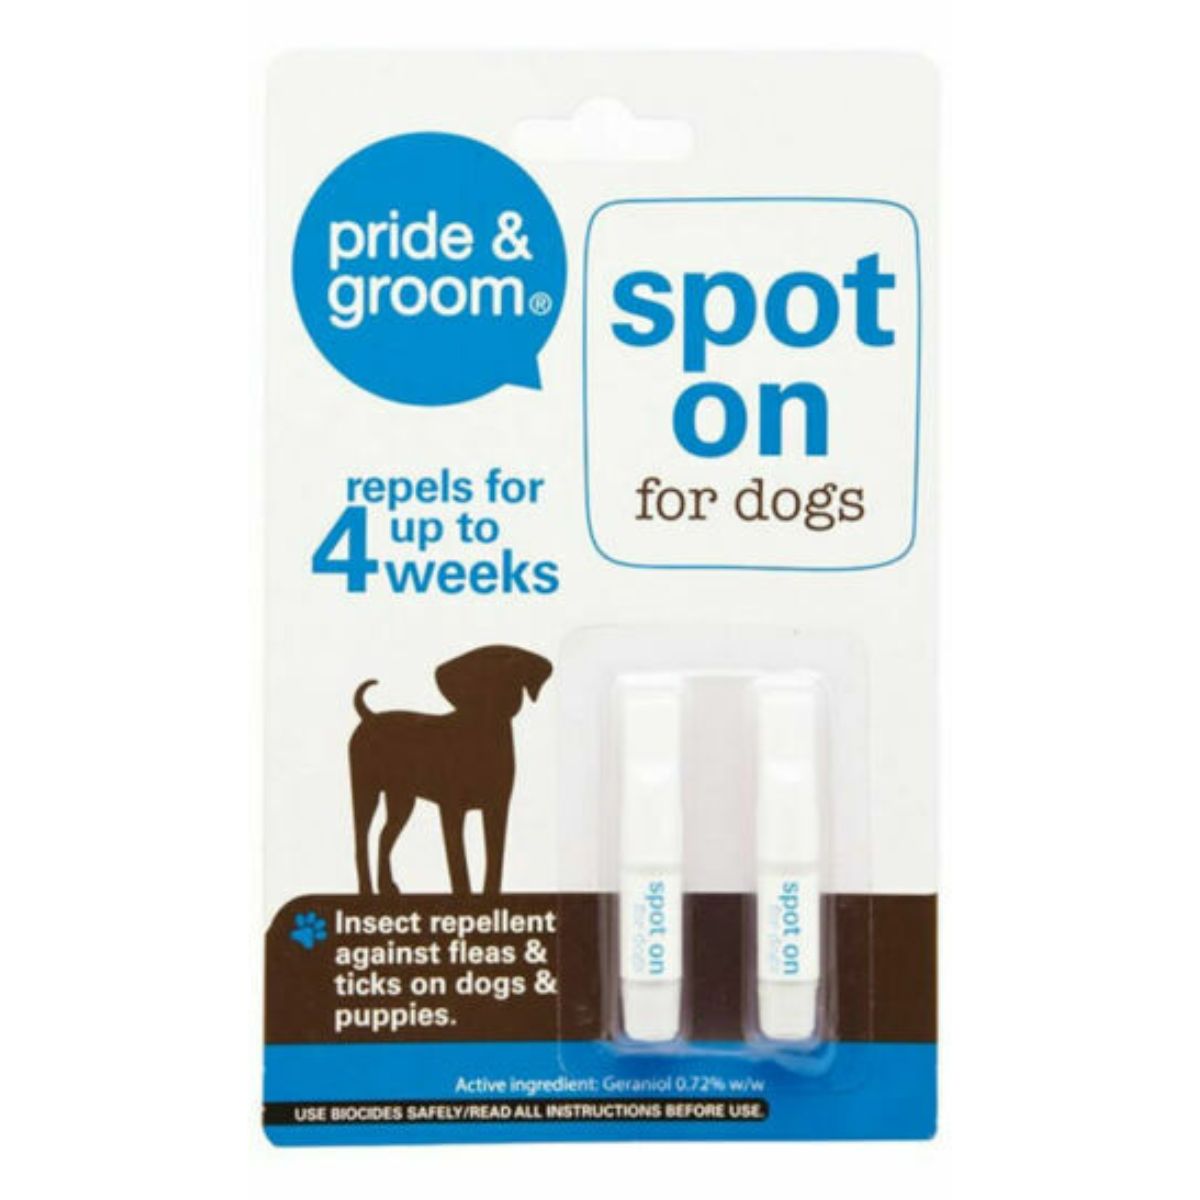 Pride & Groom - Spot On Treatment for Dogs - 2pcs spot on 4 weeks for dogs.